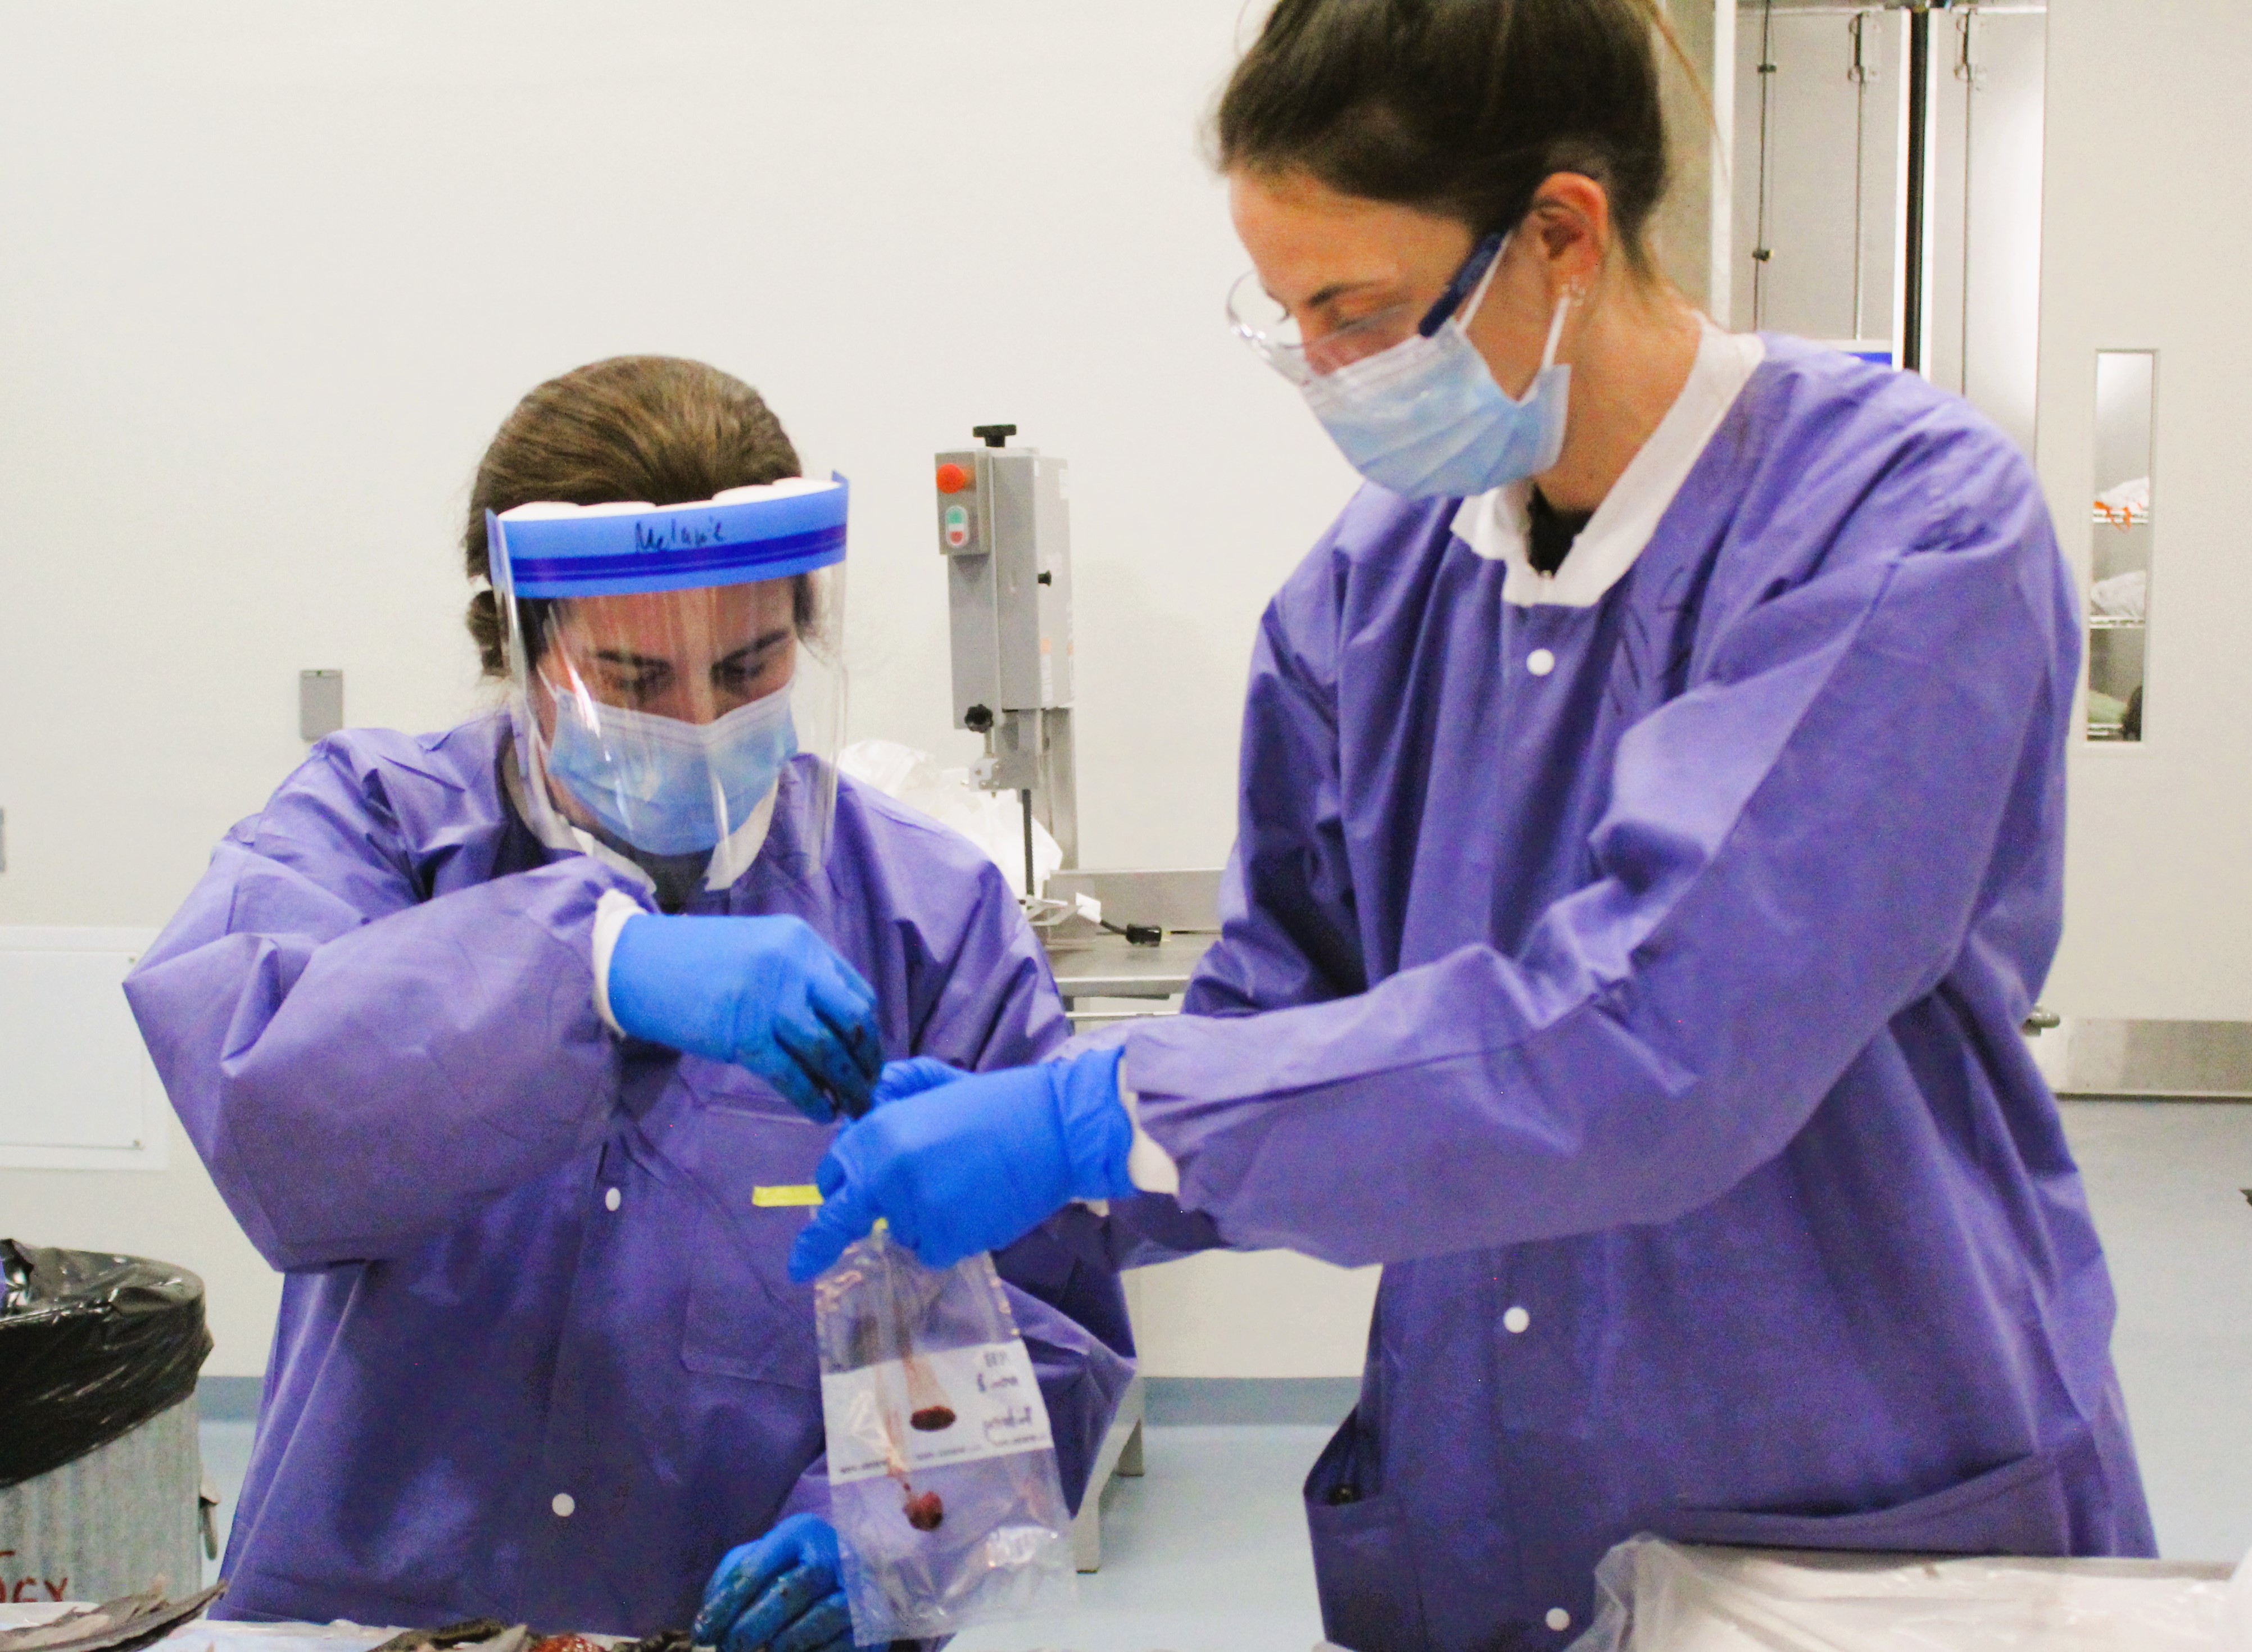 Two scientists in lab coats, masks and gloves placing a tissue sample in a bag.